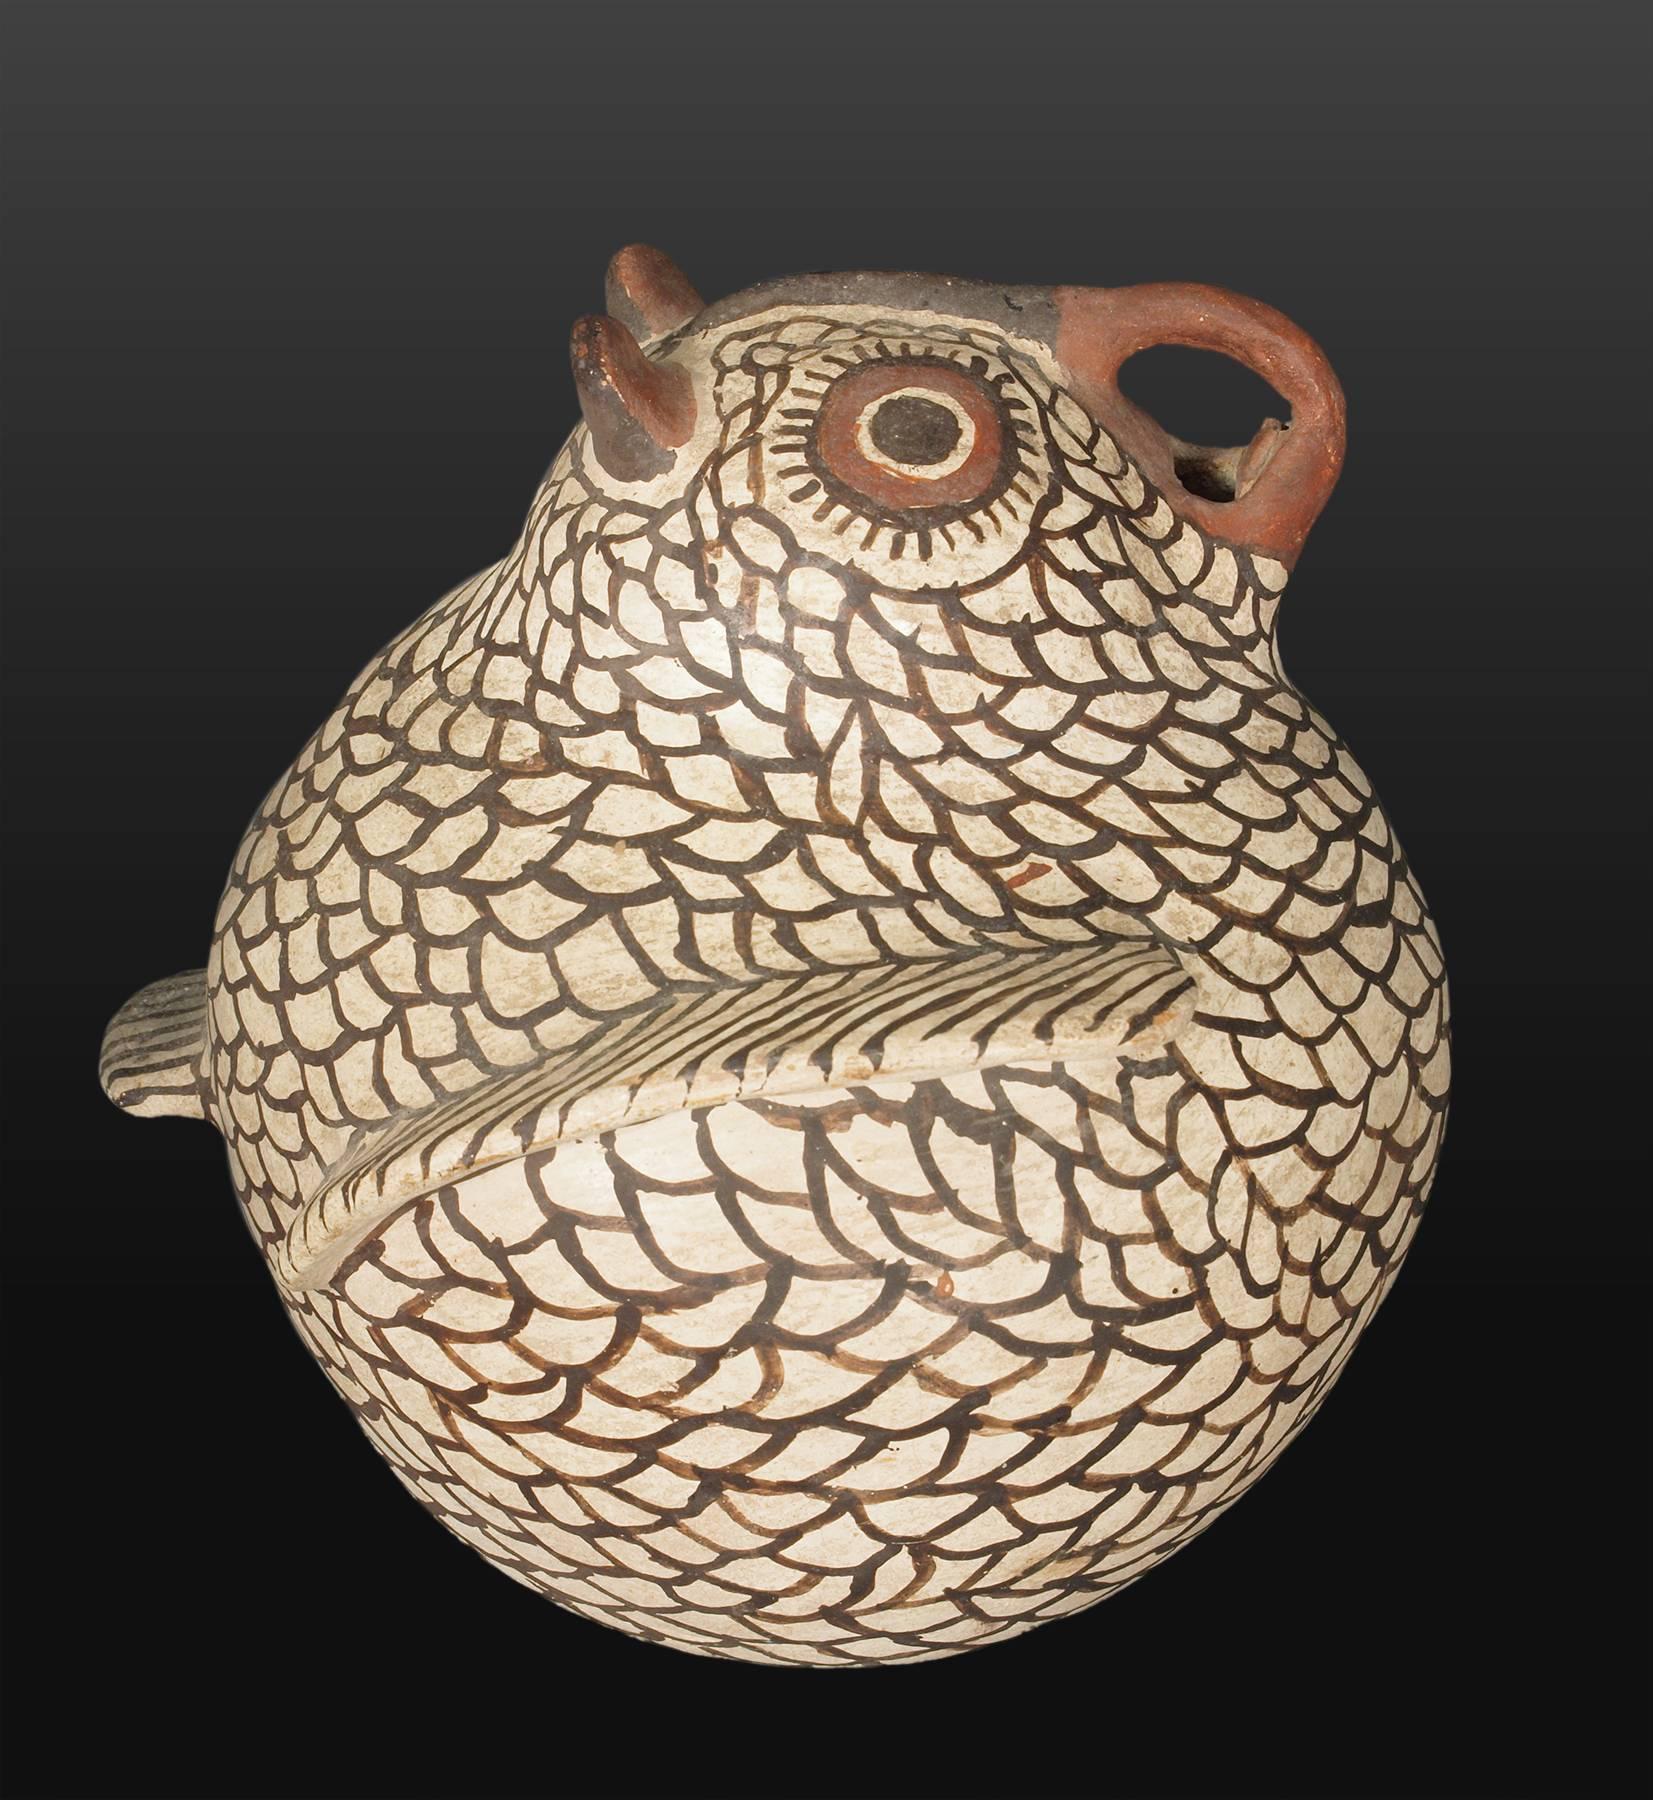 A Zuni (Pueblo Indian) polychrome pottery owl attributed to Nelli Bica (who was born around 1904). This is likely an earlier jar for her and is among the fine

expedited and international shipping is available, please contact us for an estimate.
 